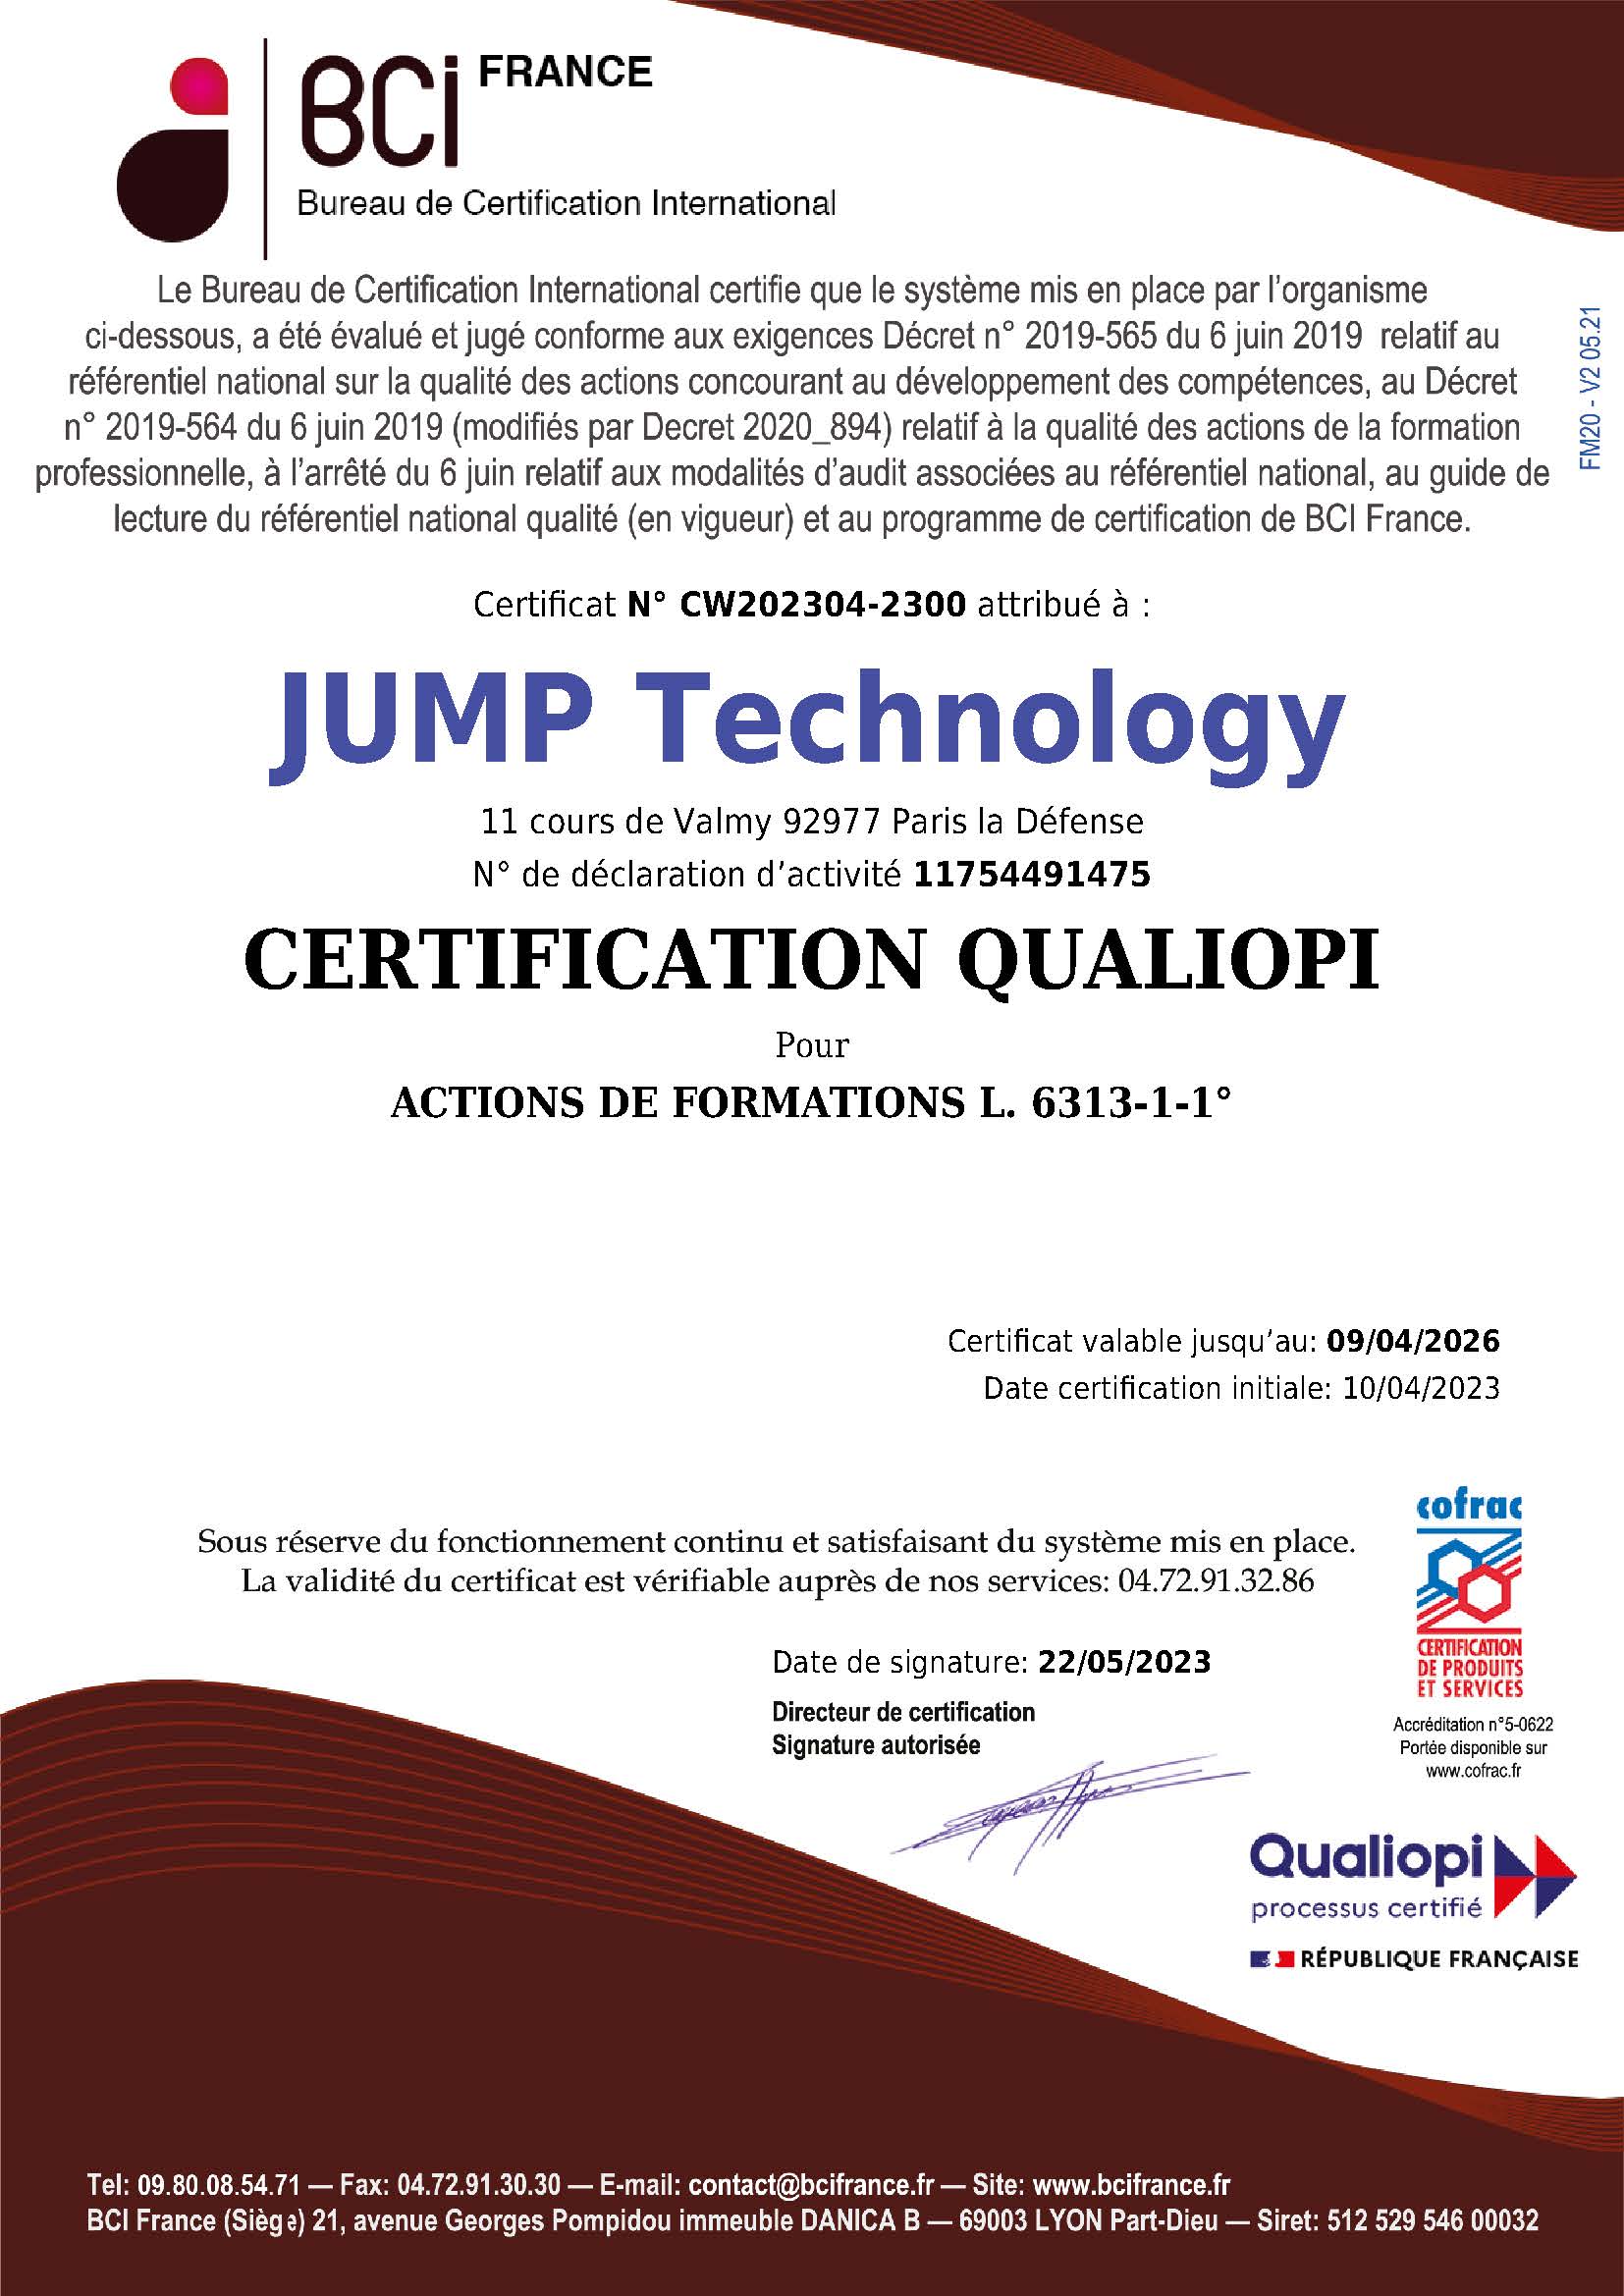 Official Certificate QUALIOPI - JUMP Technology